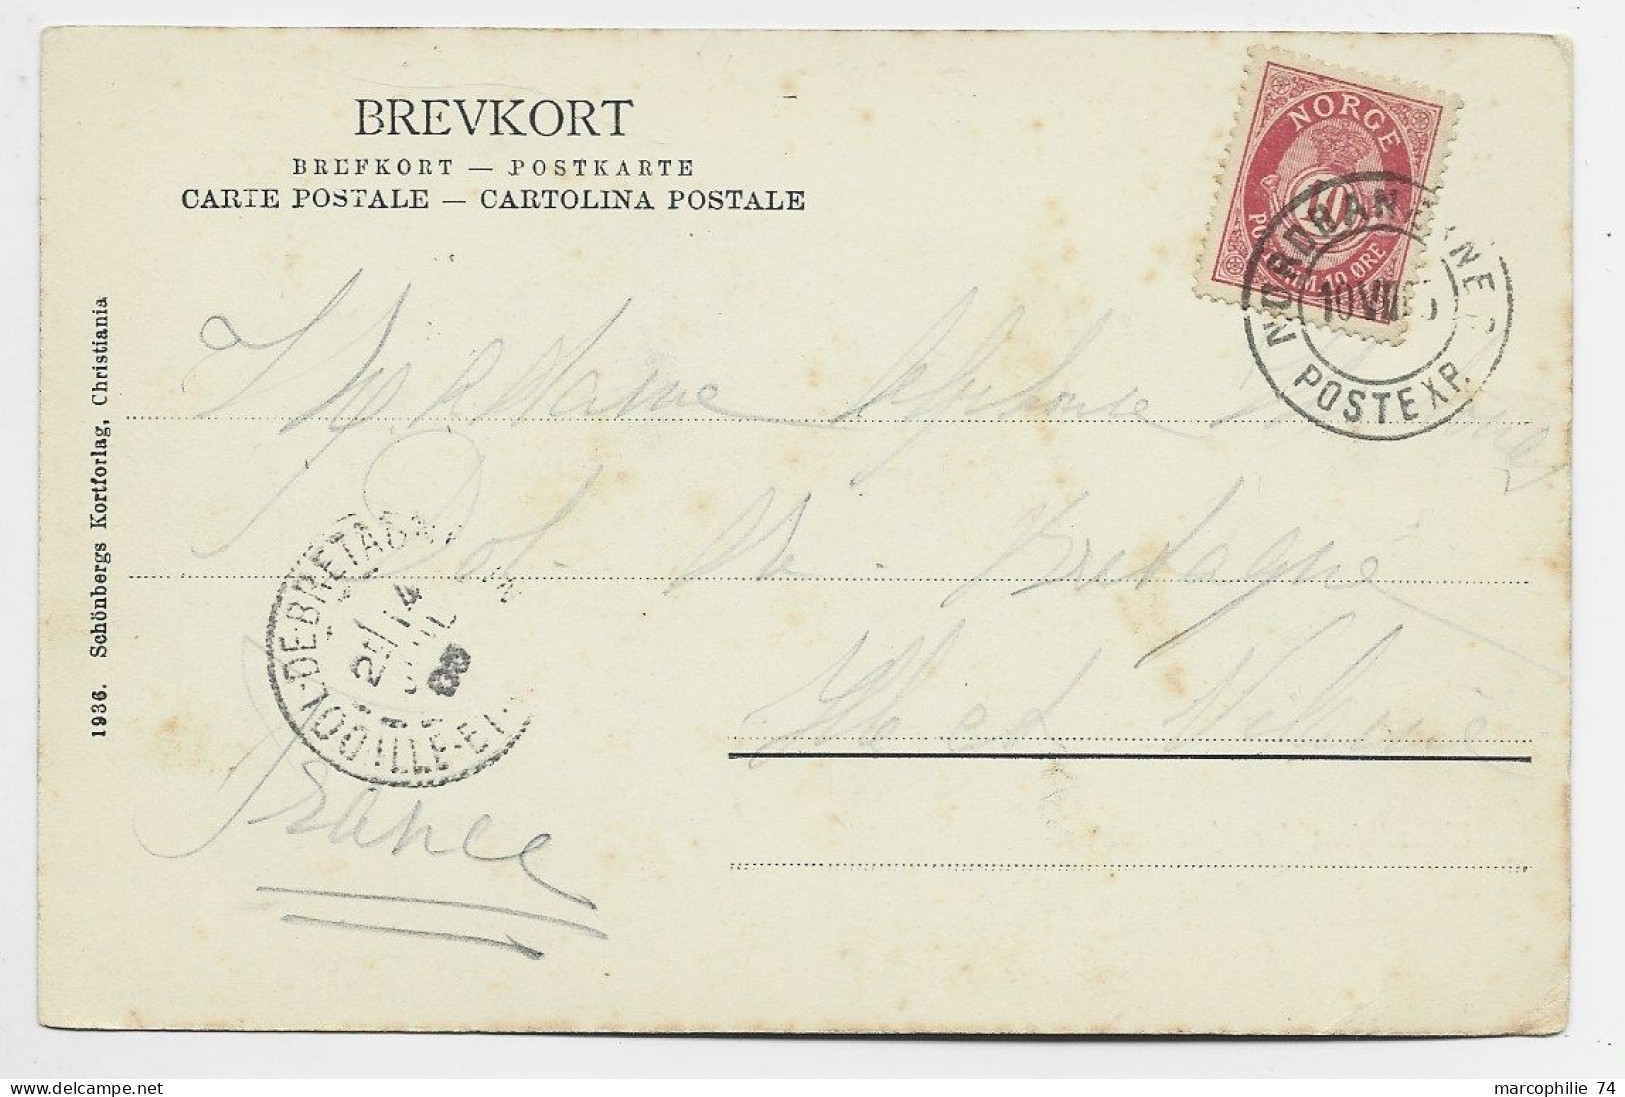 NORGE 10 SOLO CARTE BREVKORT TRONDHJEM FRA KRISTIANSTEN 1905 POSTE XP TO FRANCE - Covers & Documents